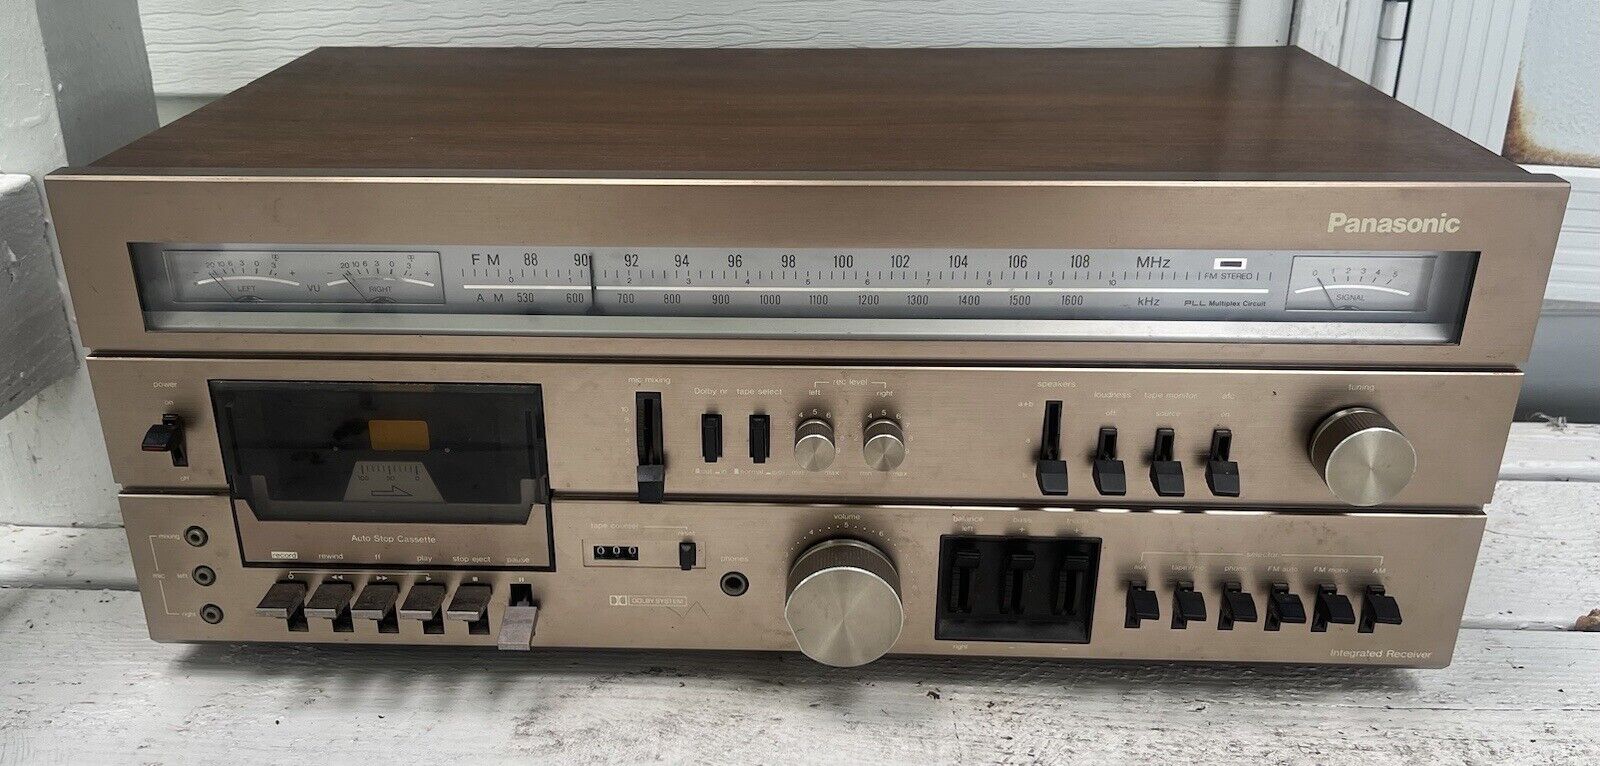 Panasonic RA-7500 AM-FM Stereo Receiver Cassette Tape Recorder Vintage Tested